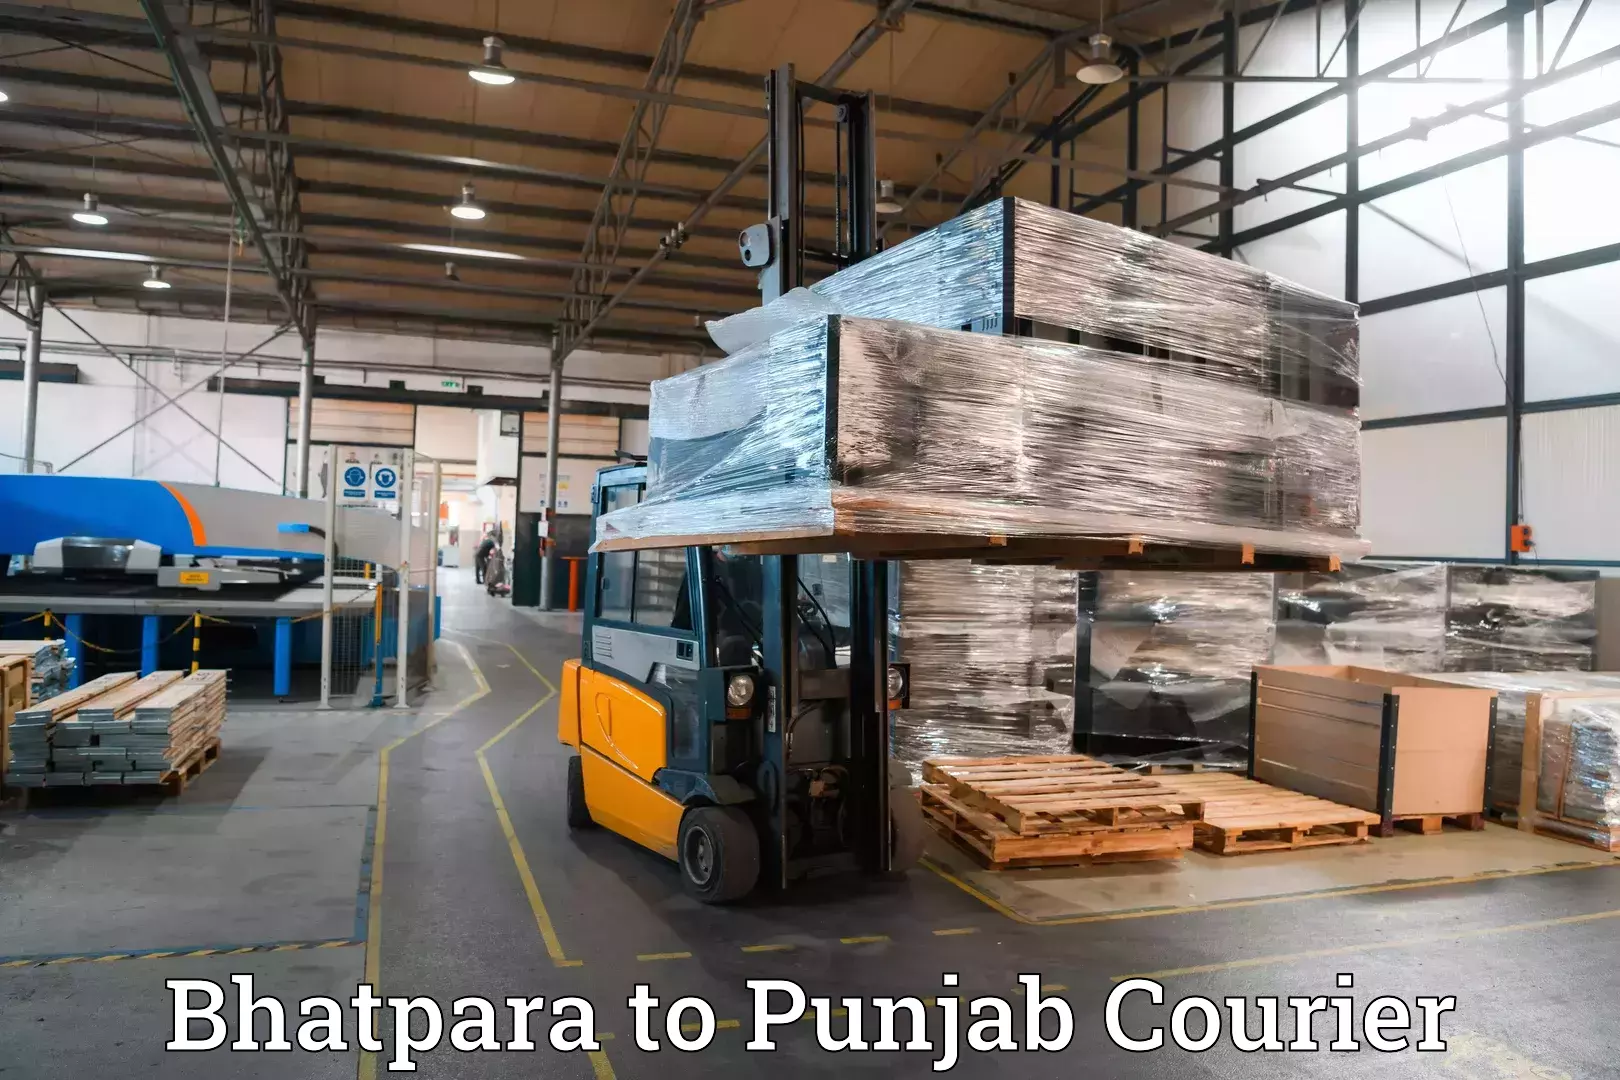 Luggage transport consultancy Bhatpara to Pathankot